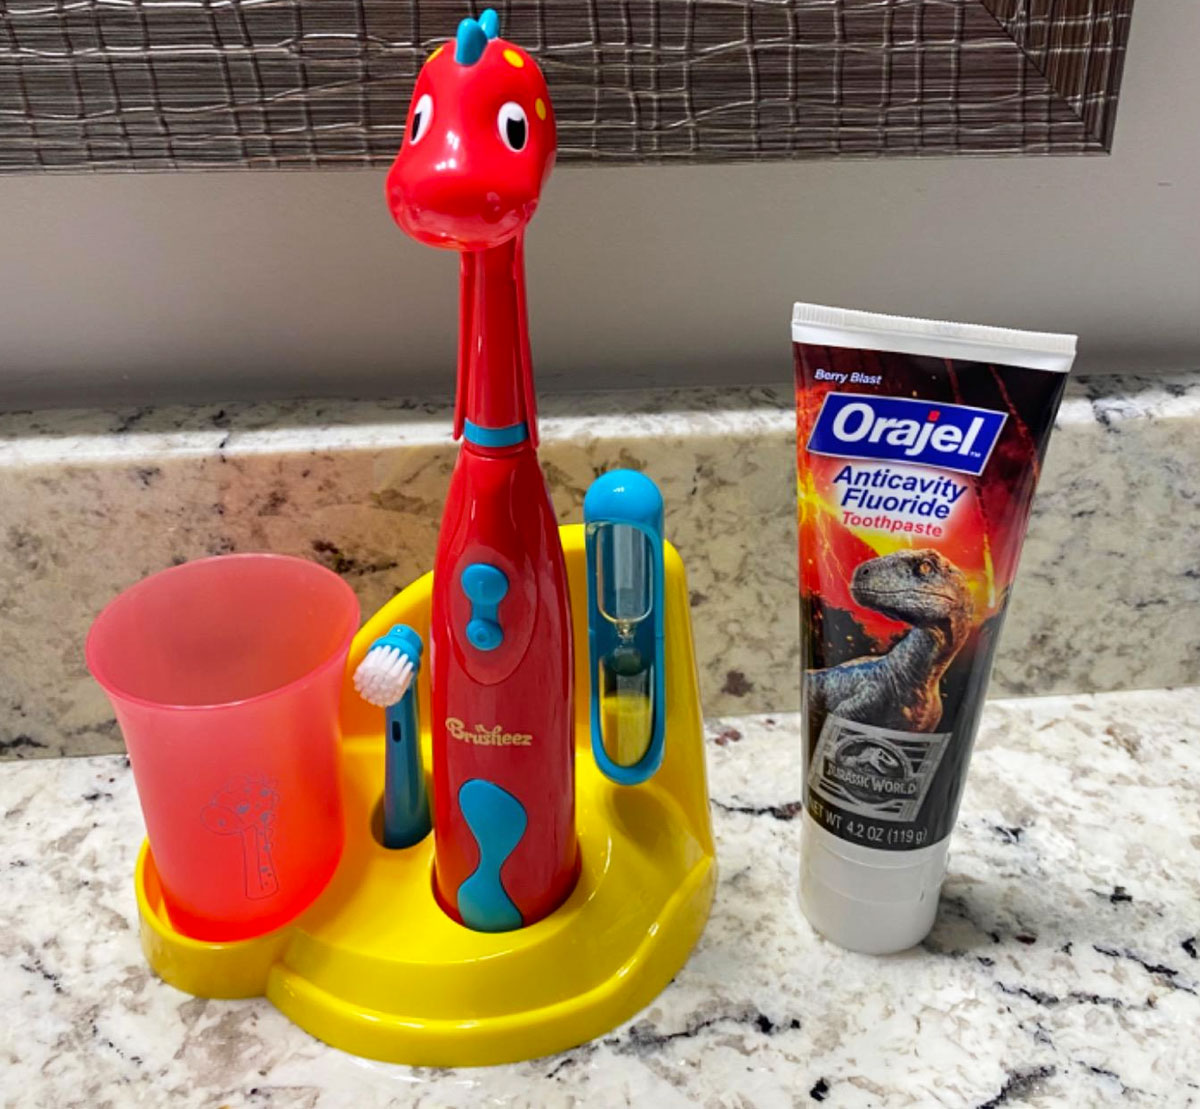 red dinosaur themed kids electric toothbrush set with timer and rinse cup on a bathroom counter